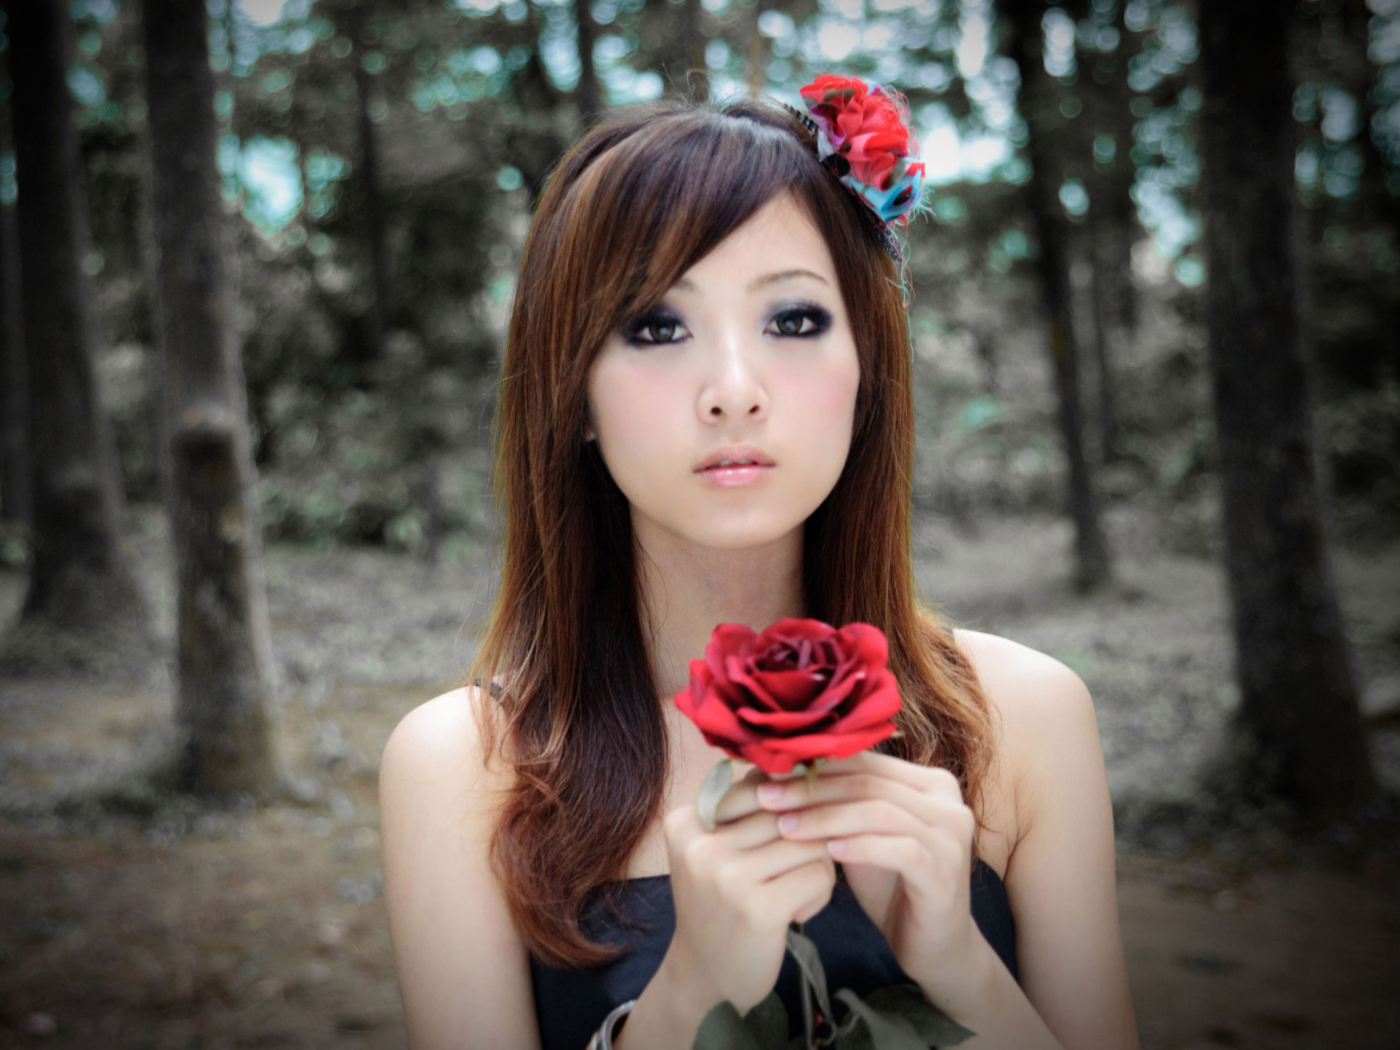 Asian Girl With Red Rose screenshot #1 1400x1050